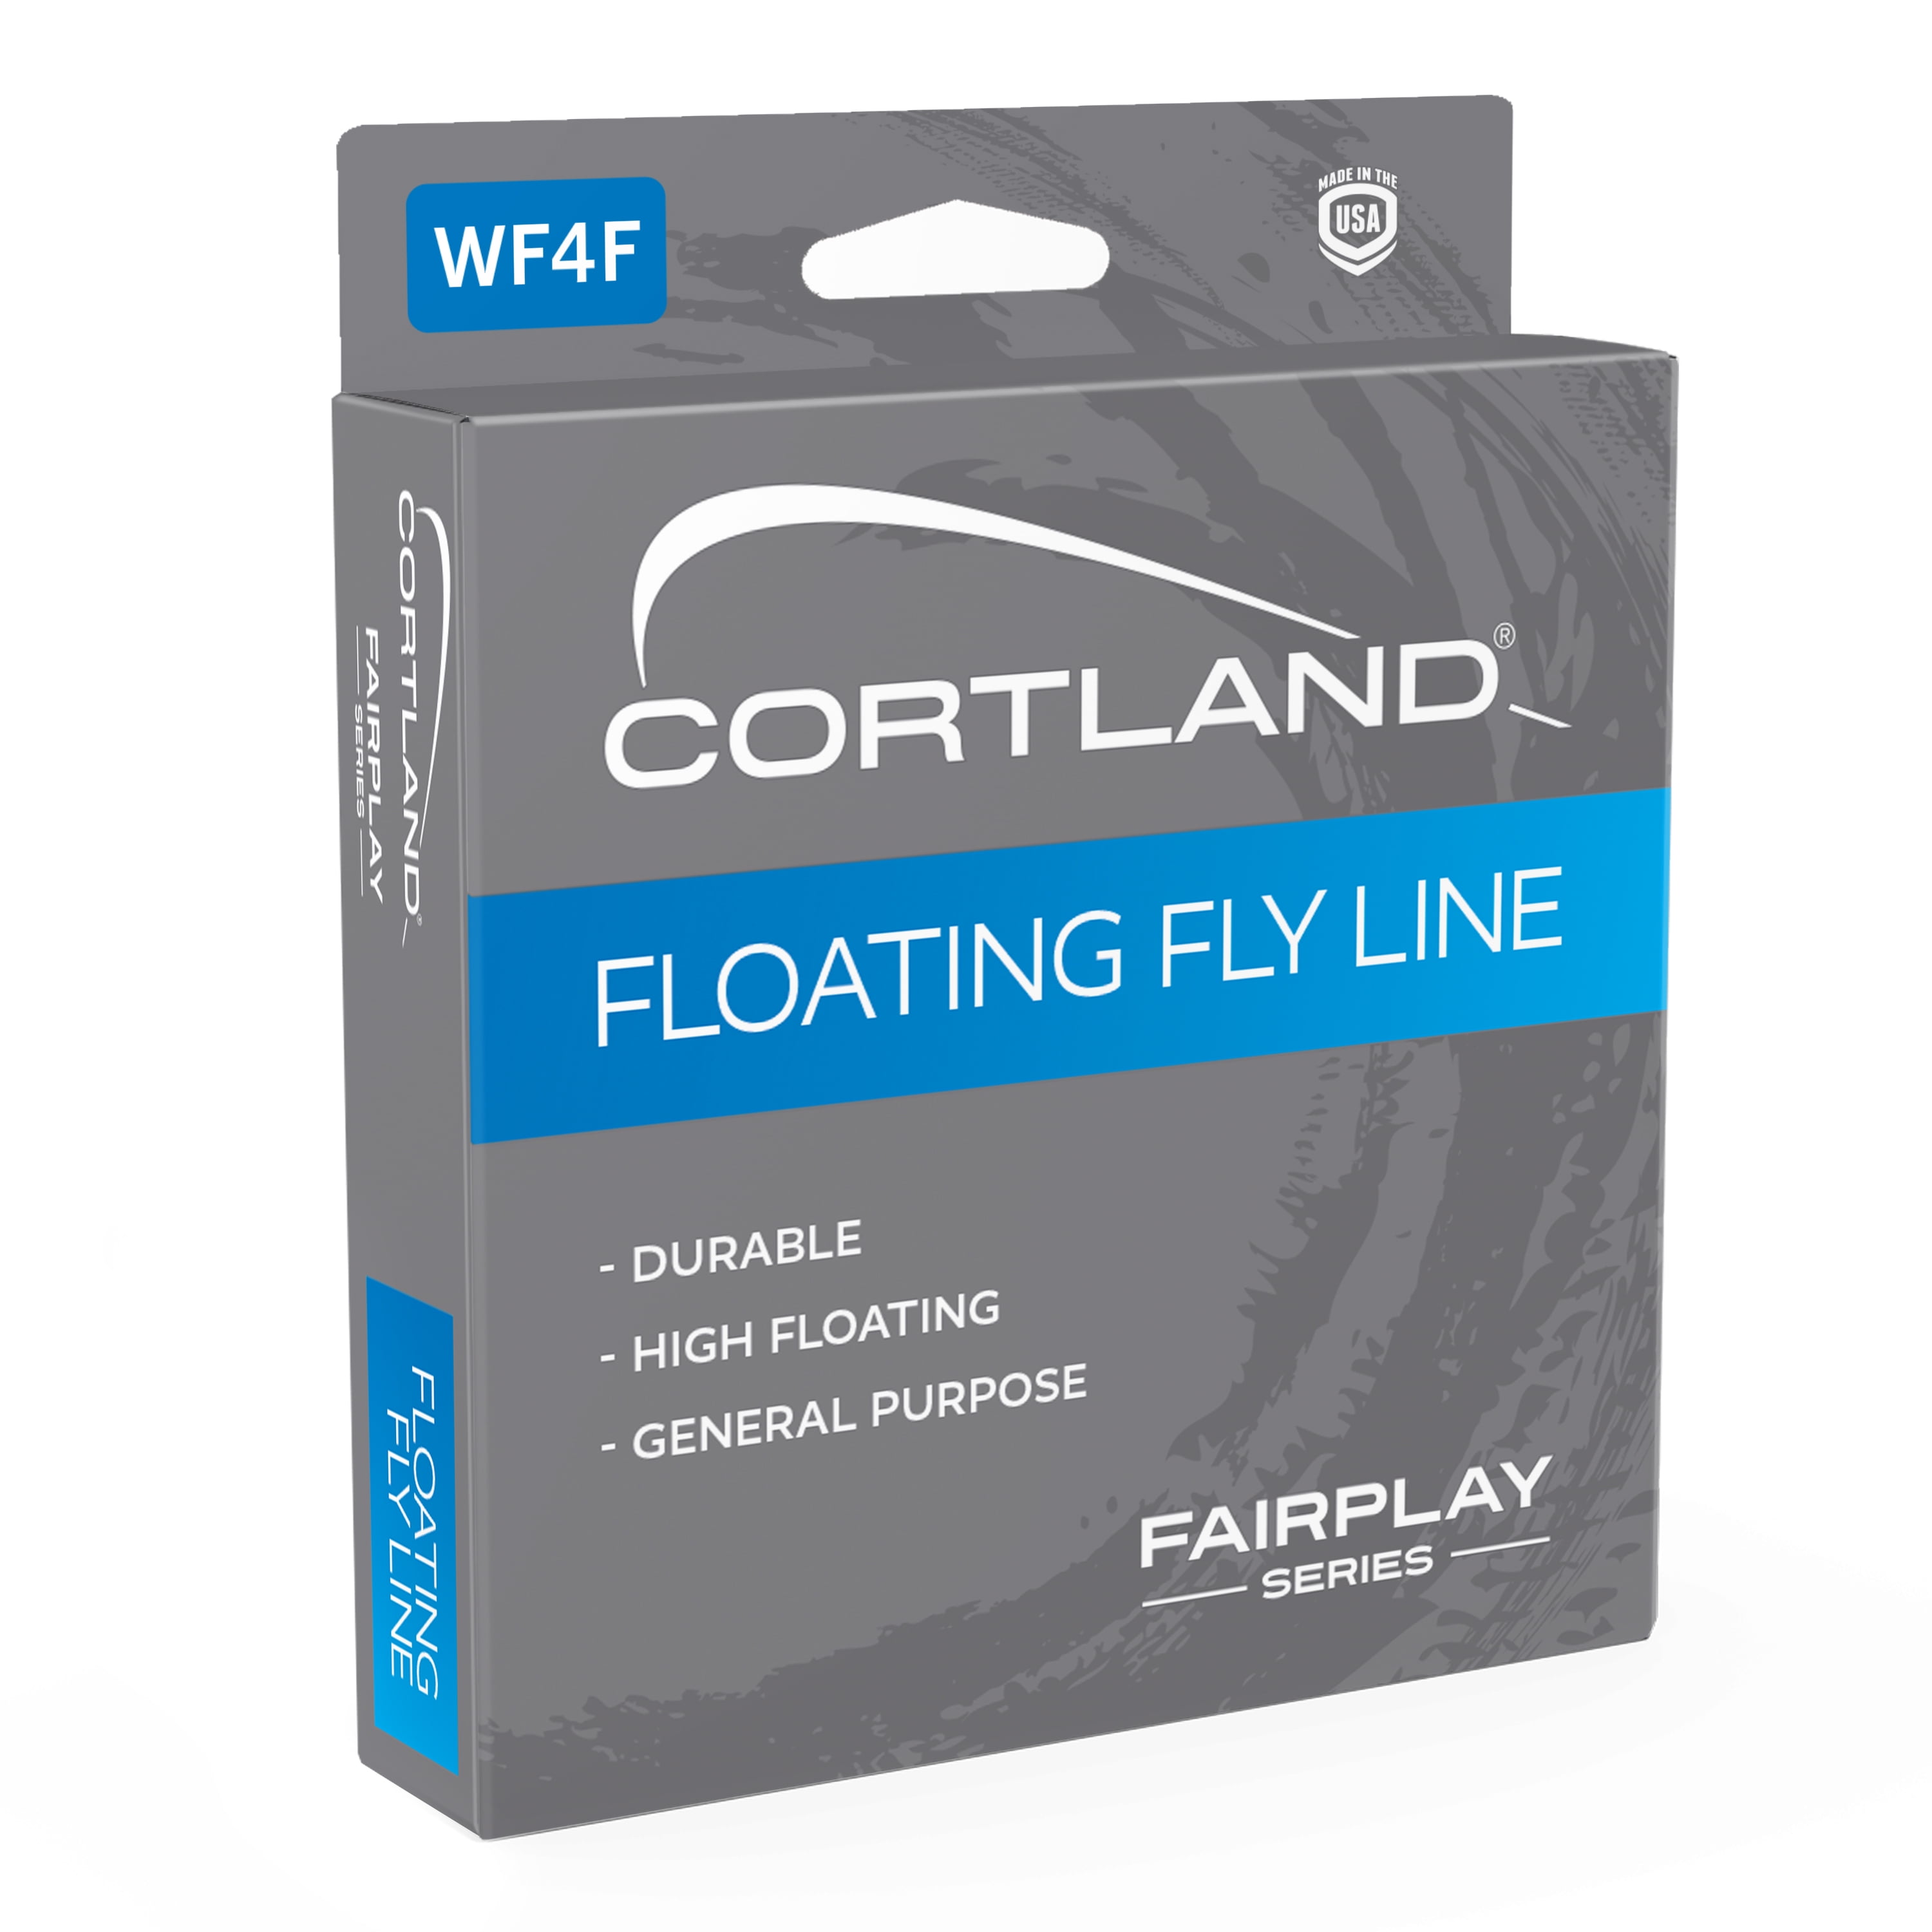 Cortland 444sl Classic Wf4f Floating Fly Line Long Body for sale online 